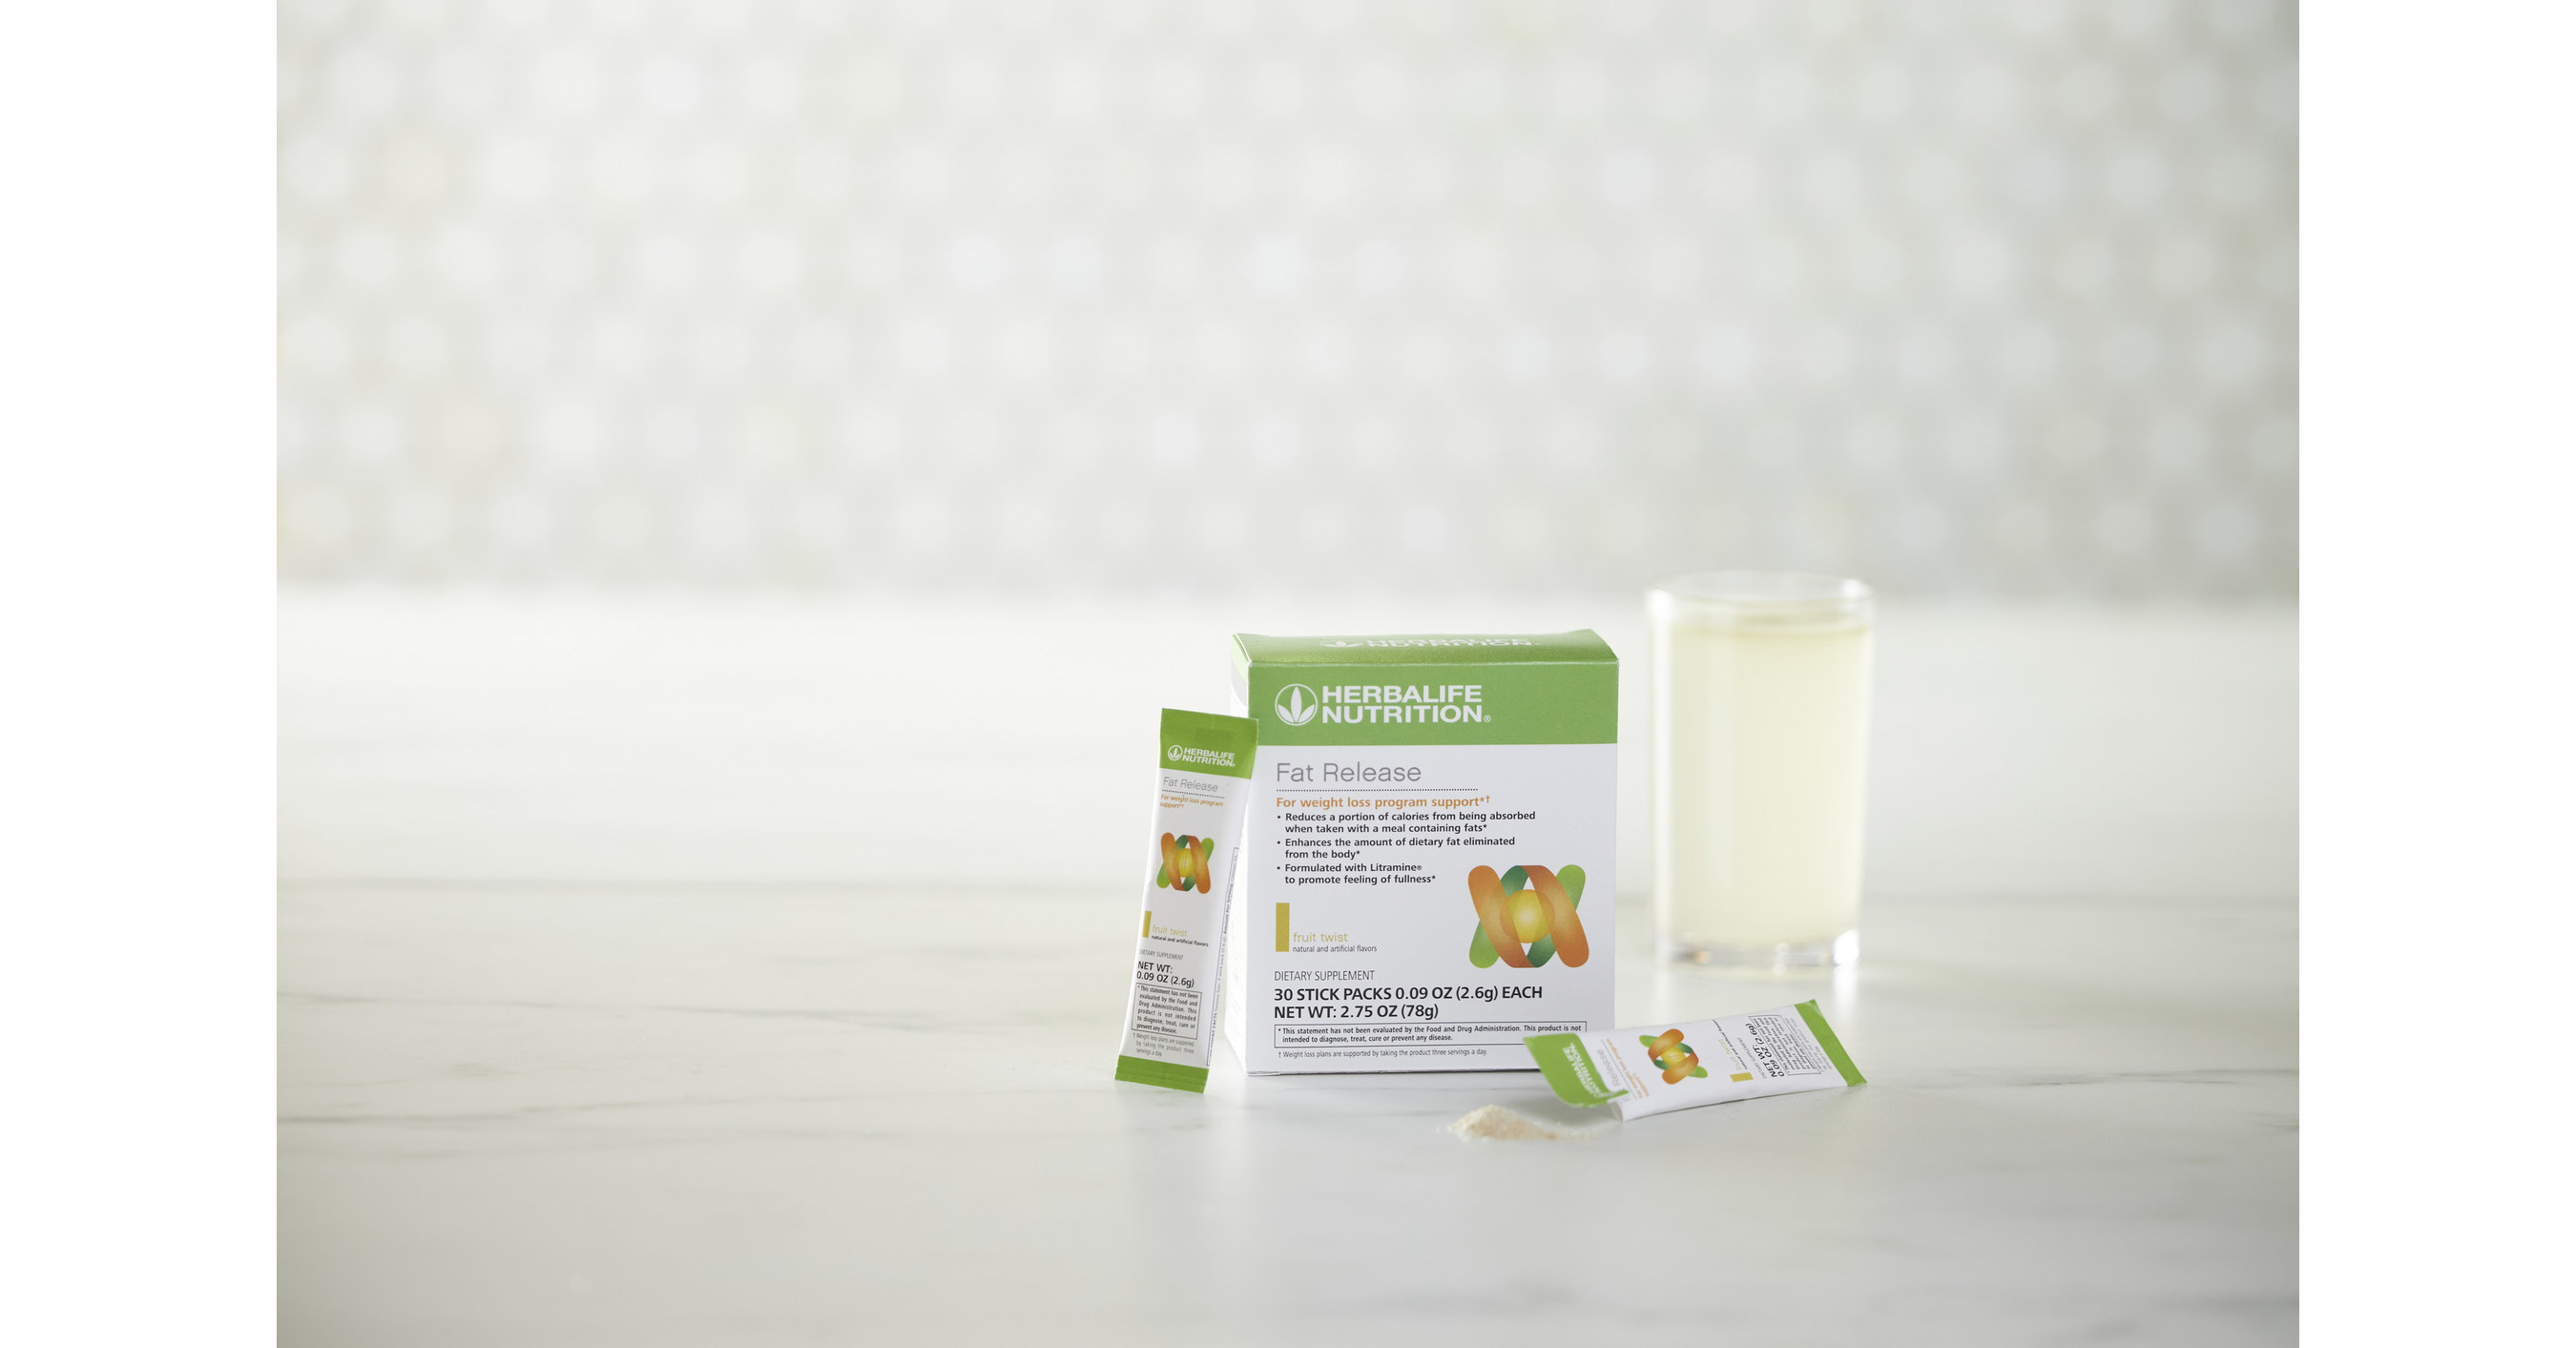 HERBALIFE NUTRITION INTRODUCES A NEW PRODUCT TO HELP CONSUMERS GET BACK ON TRACK WITH THEIR HEALTHY LIFESTYLE